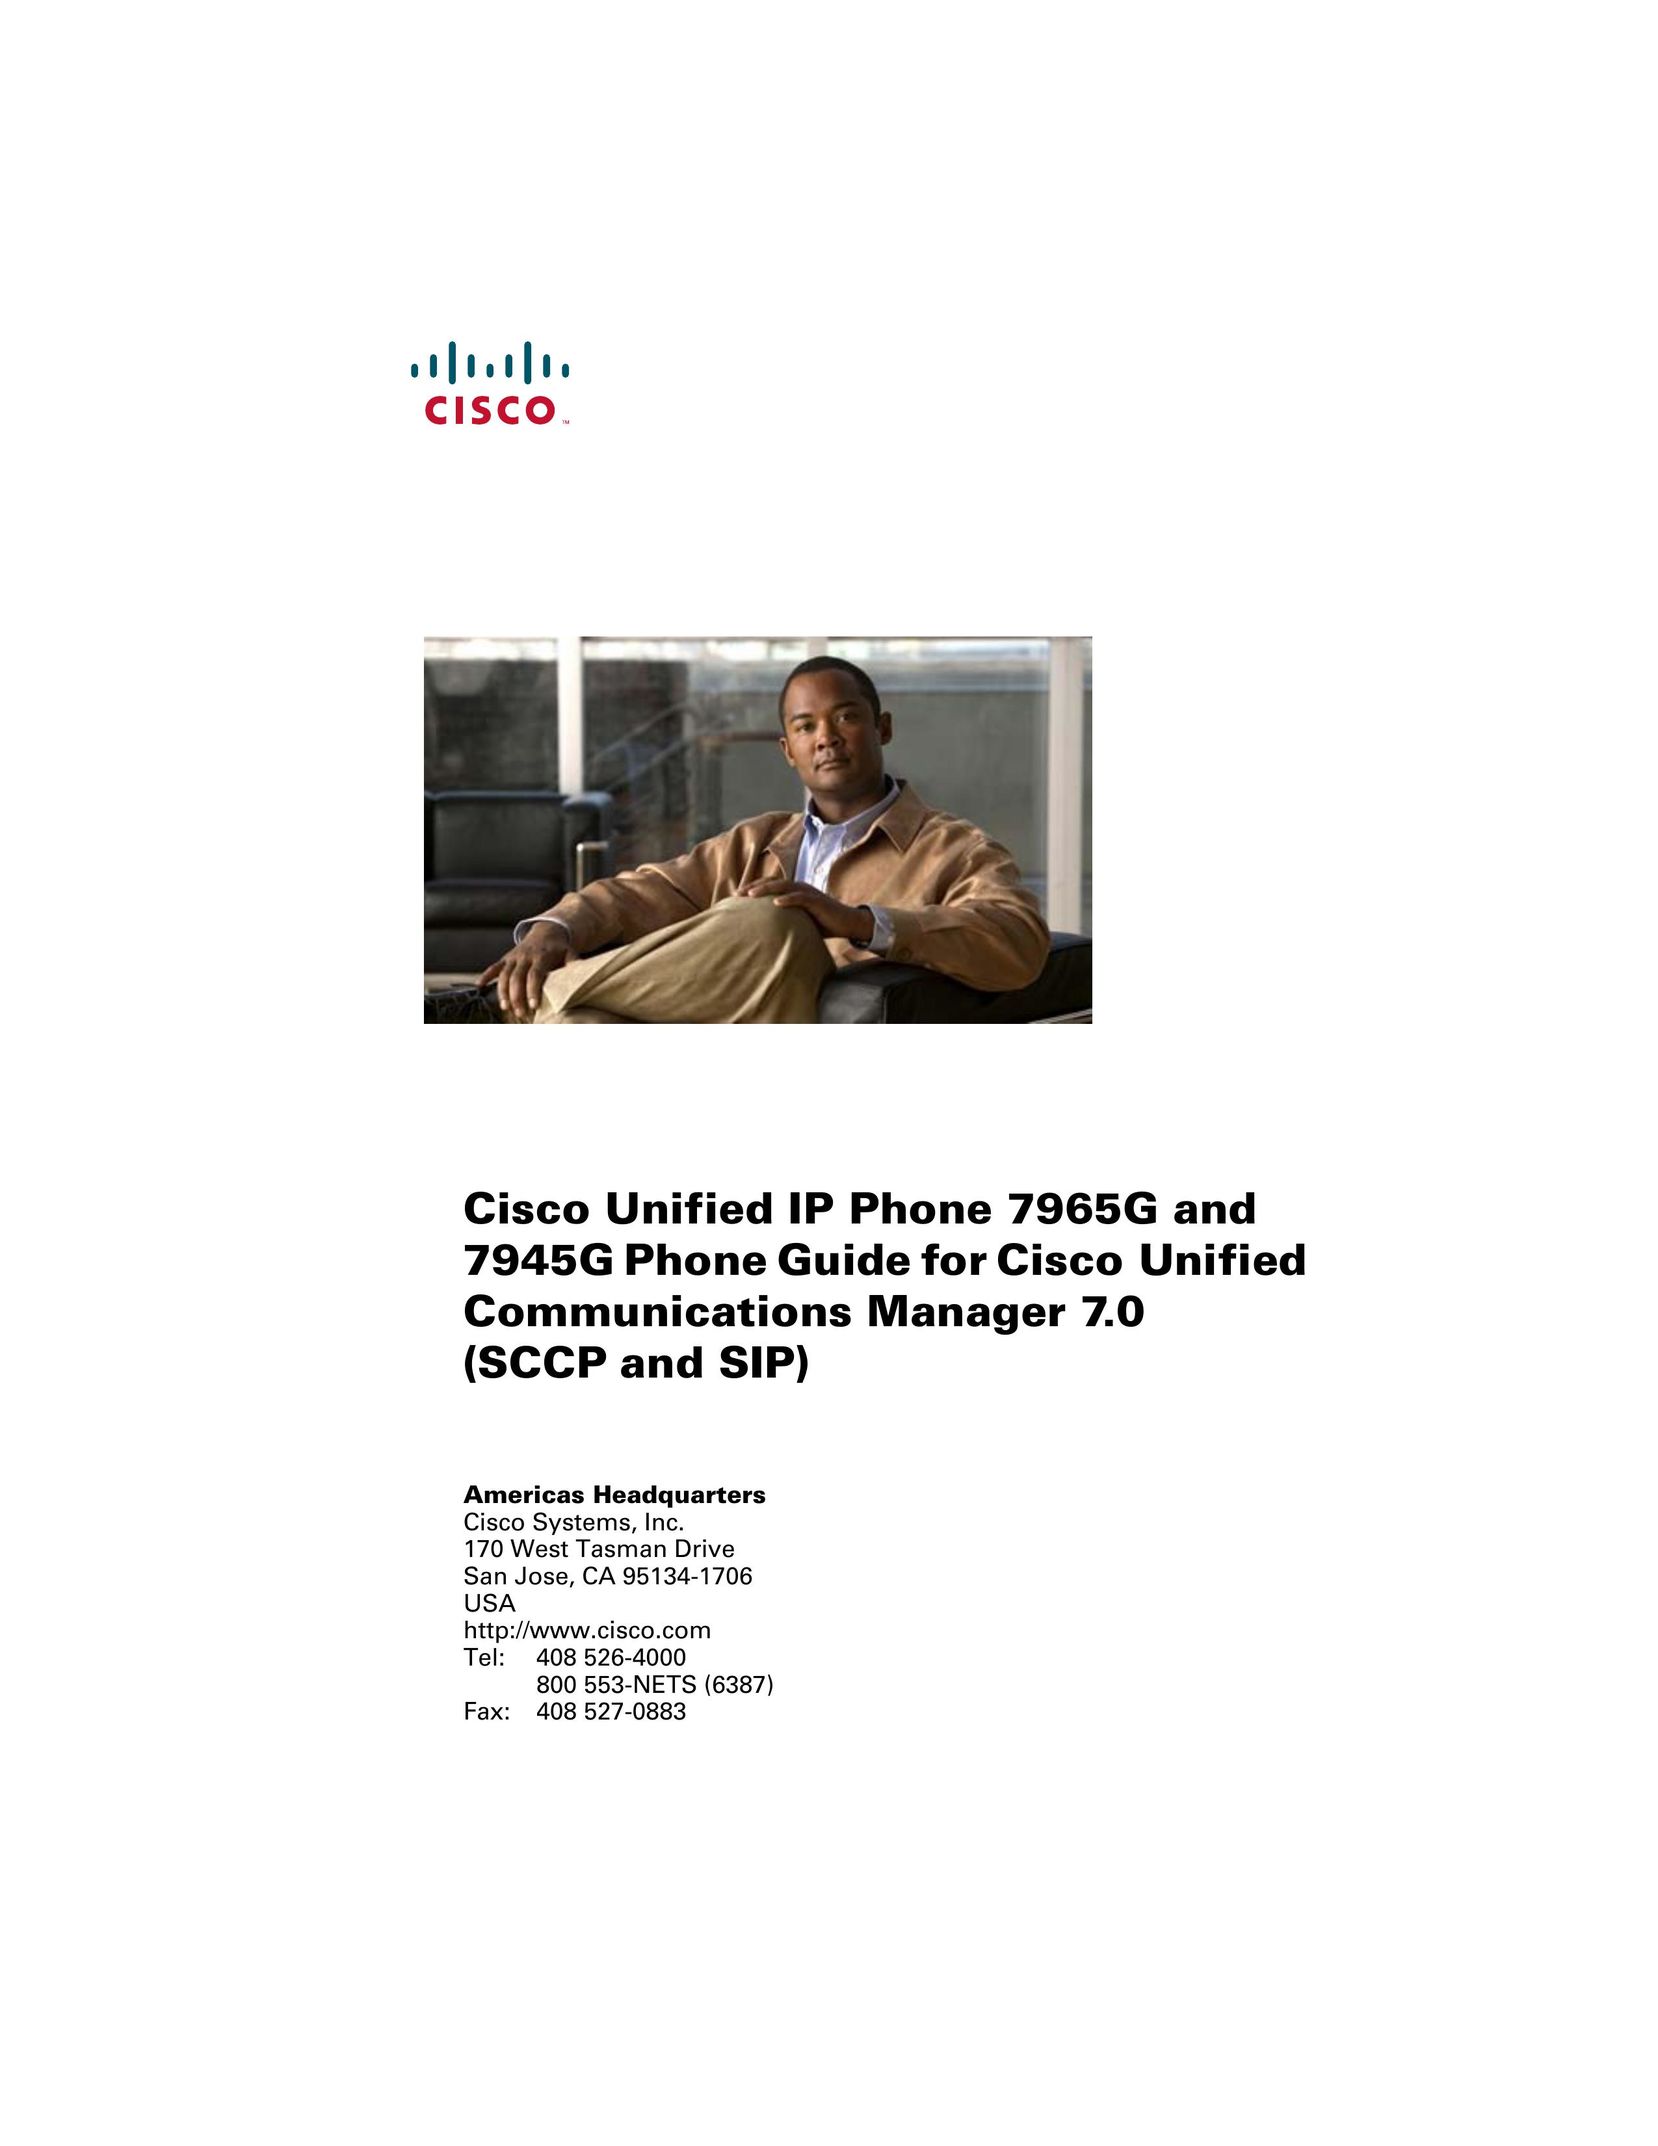 Cisco Systems 7945G Cordless Telephone User Manual (Page 1)